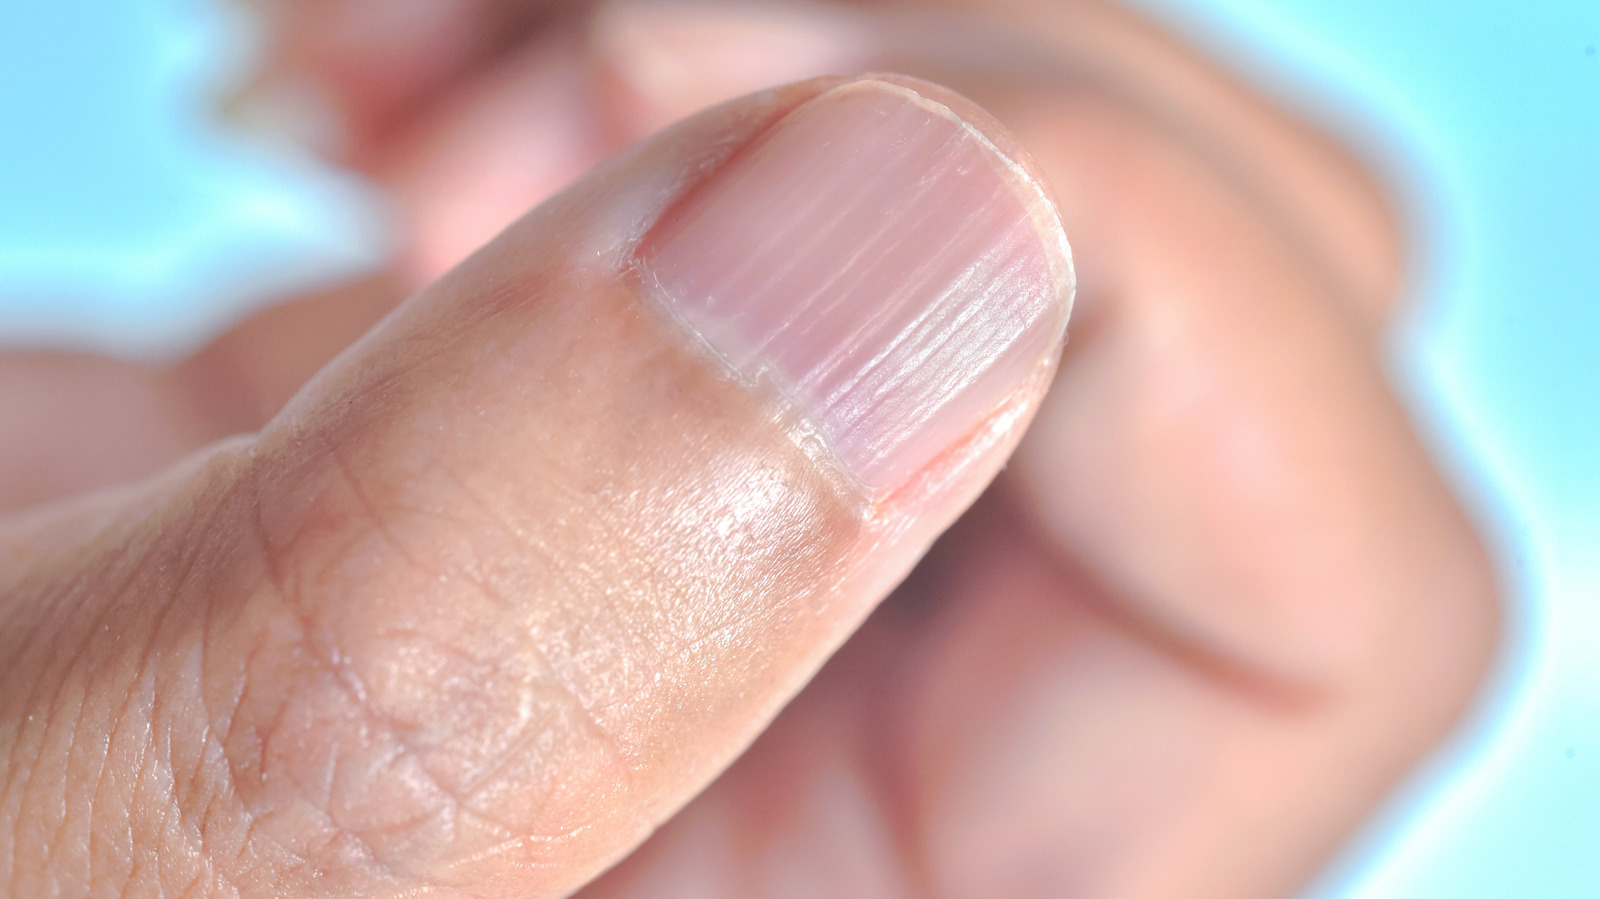 Top Health Tips on Treating Improving Nail Health | Lybrate